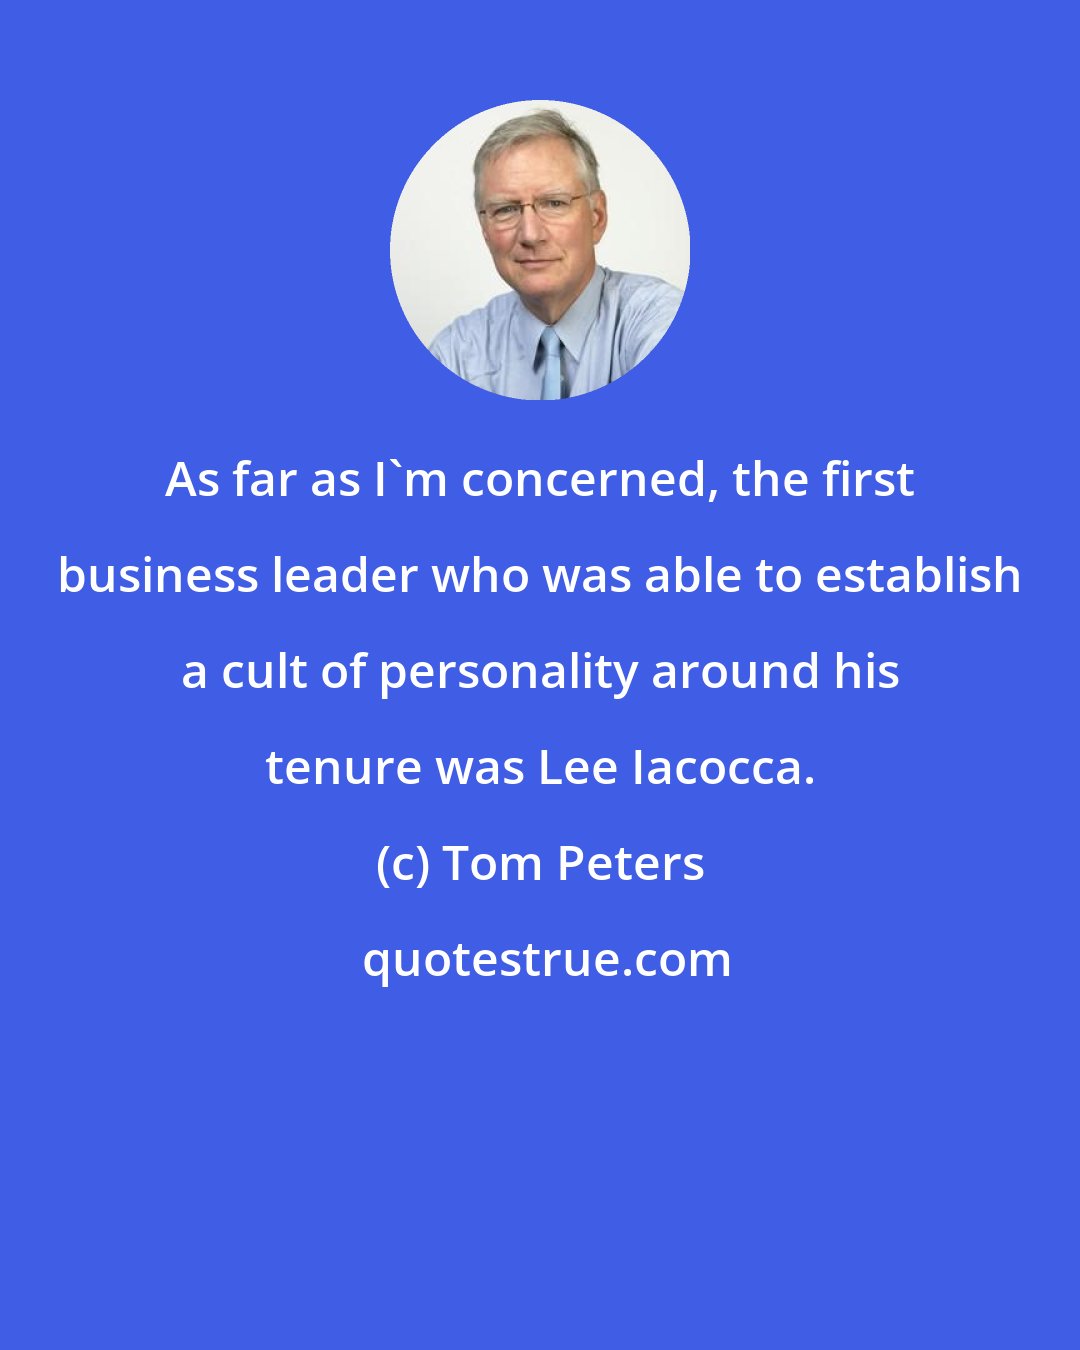 Tom Peters: As far as I'm concerned, the first business leader who was able to establish a cult of personality around his tenure was Lee Iacocca.